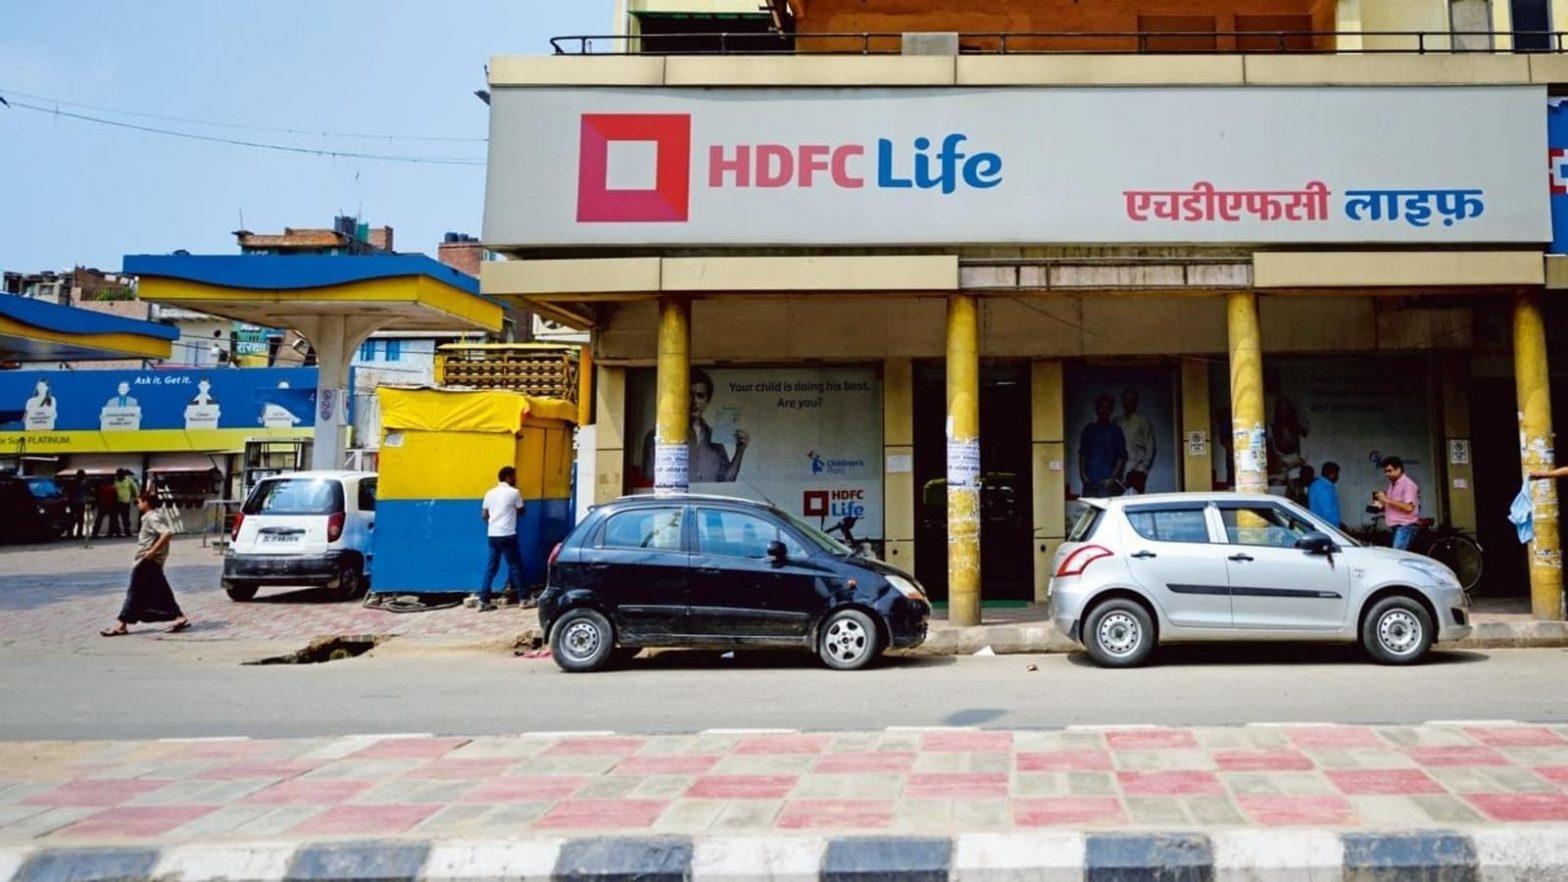 HDFC Life to acquire Exide Life Insurance for ₹6,687 crore_40.1